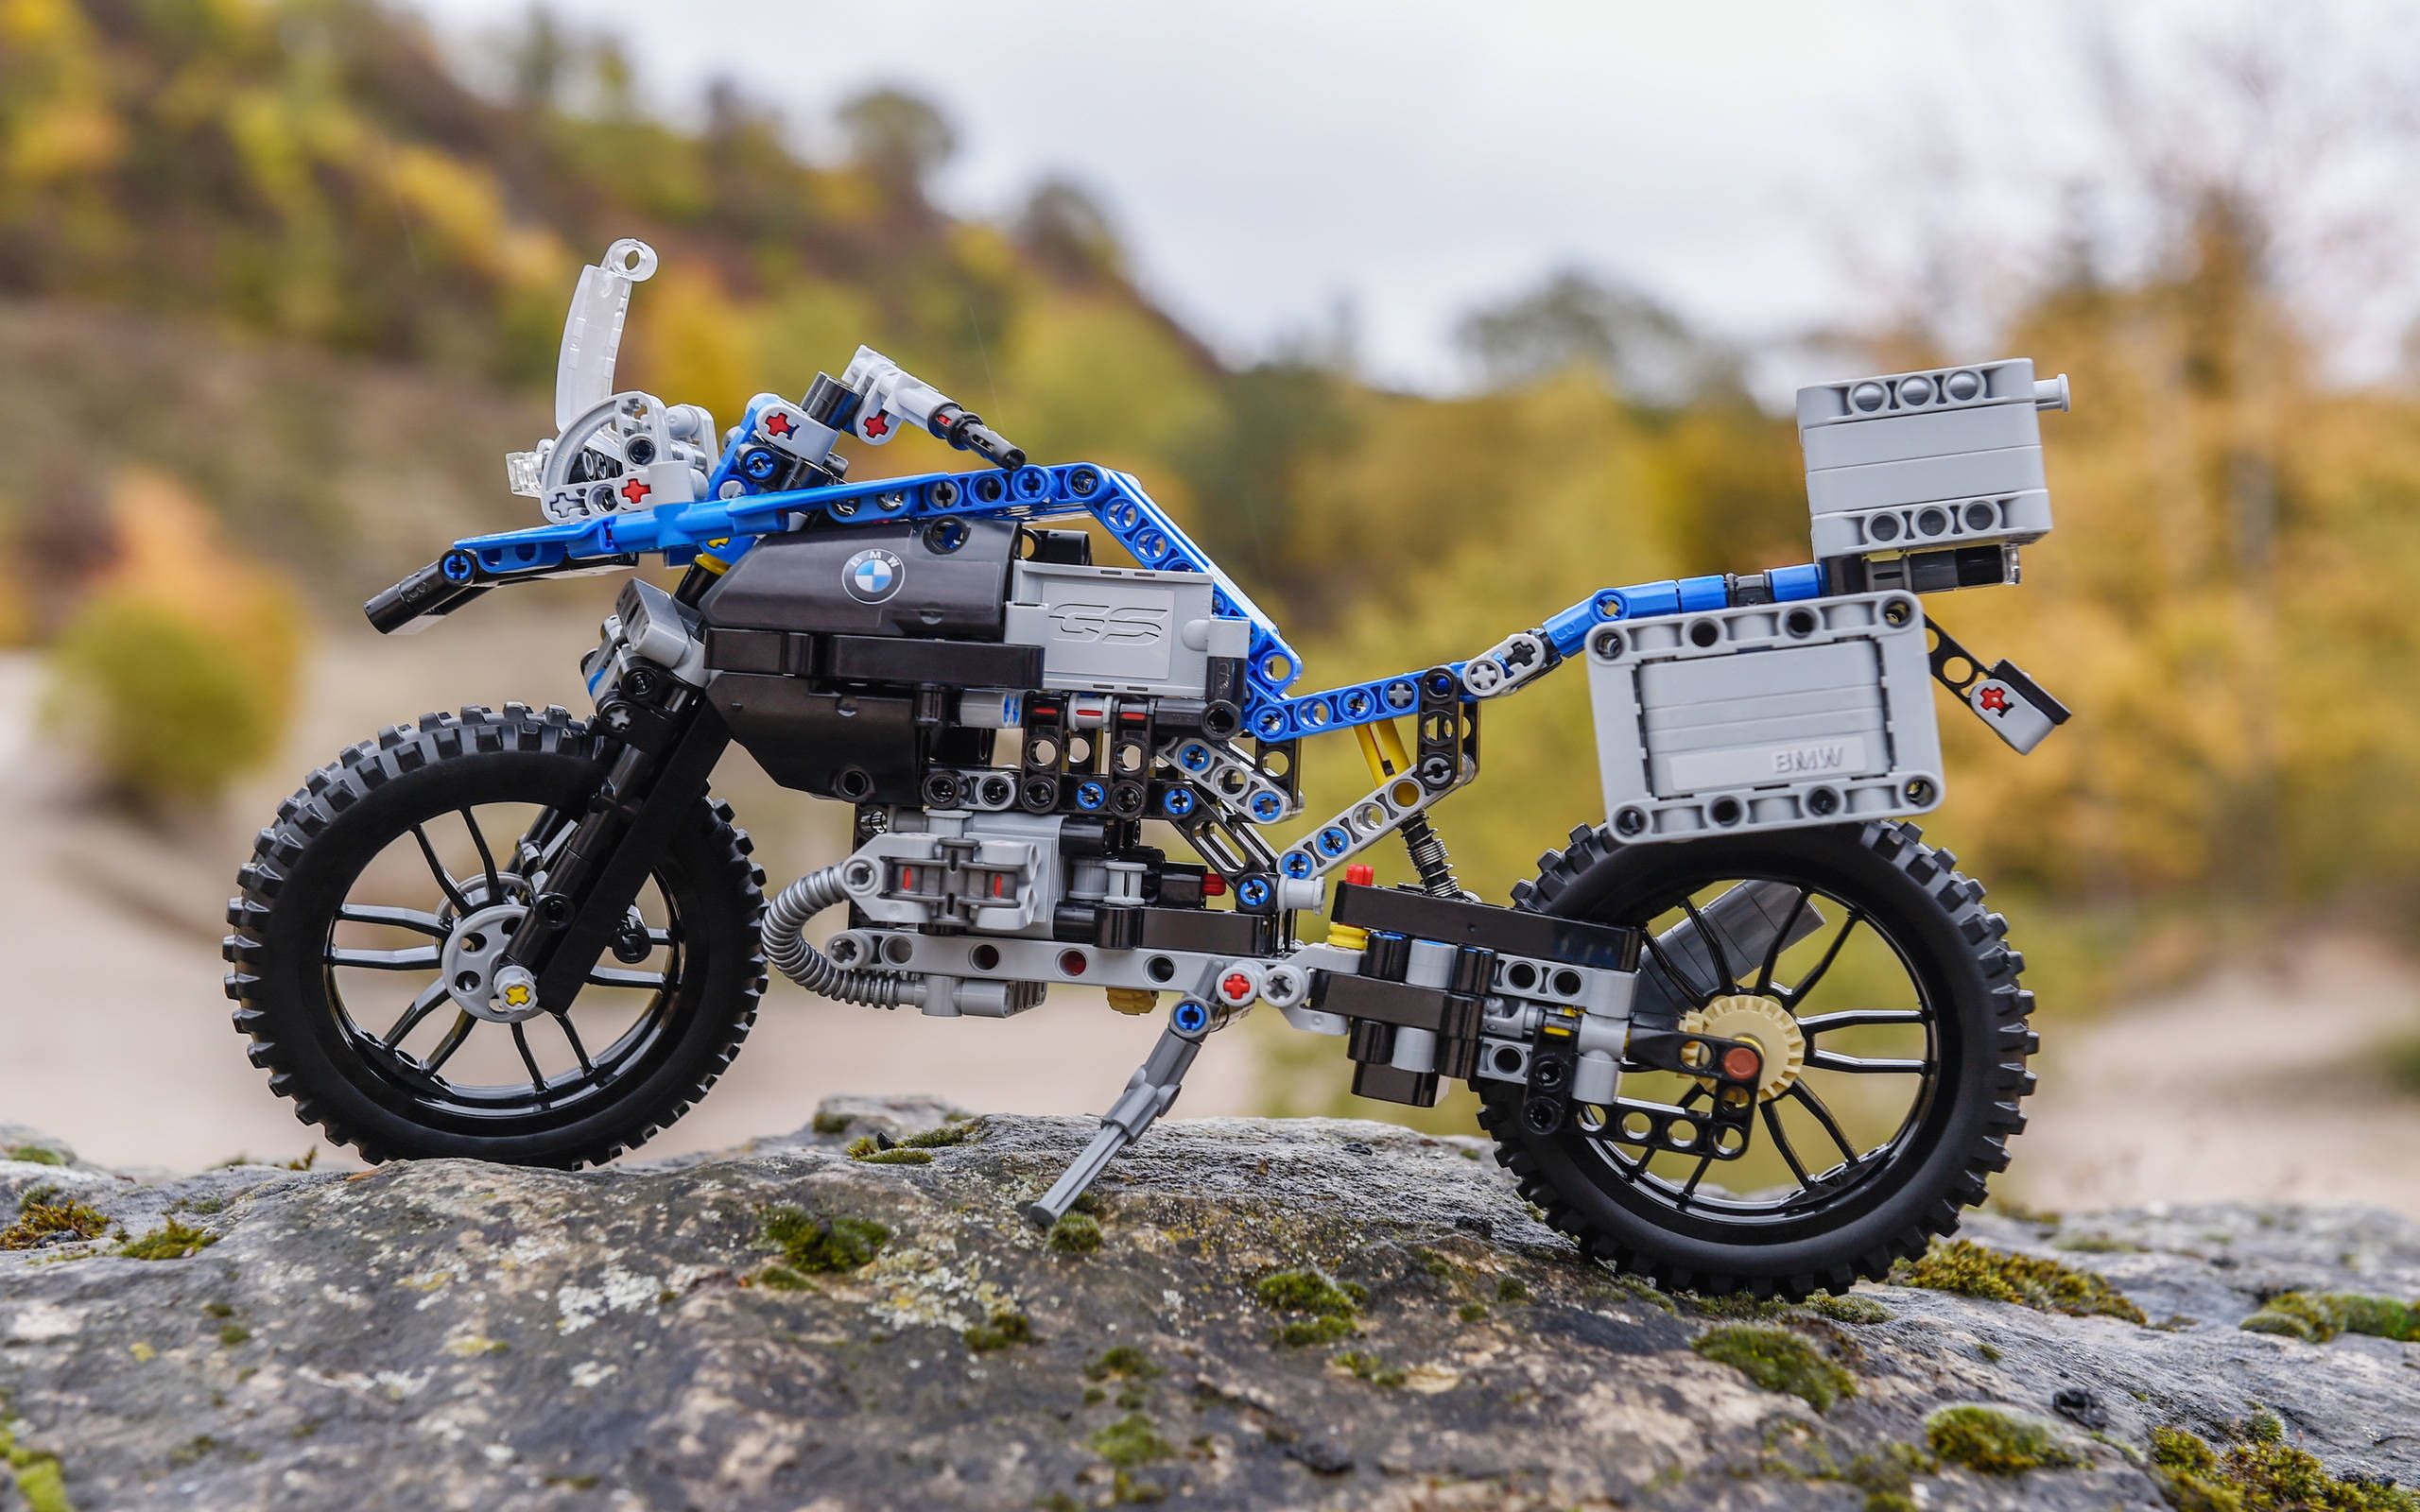 Lego 1200 GS gears up for miniature plastic